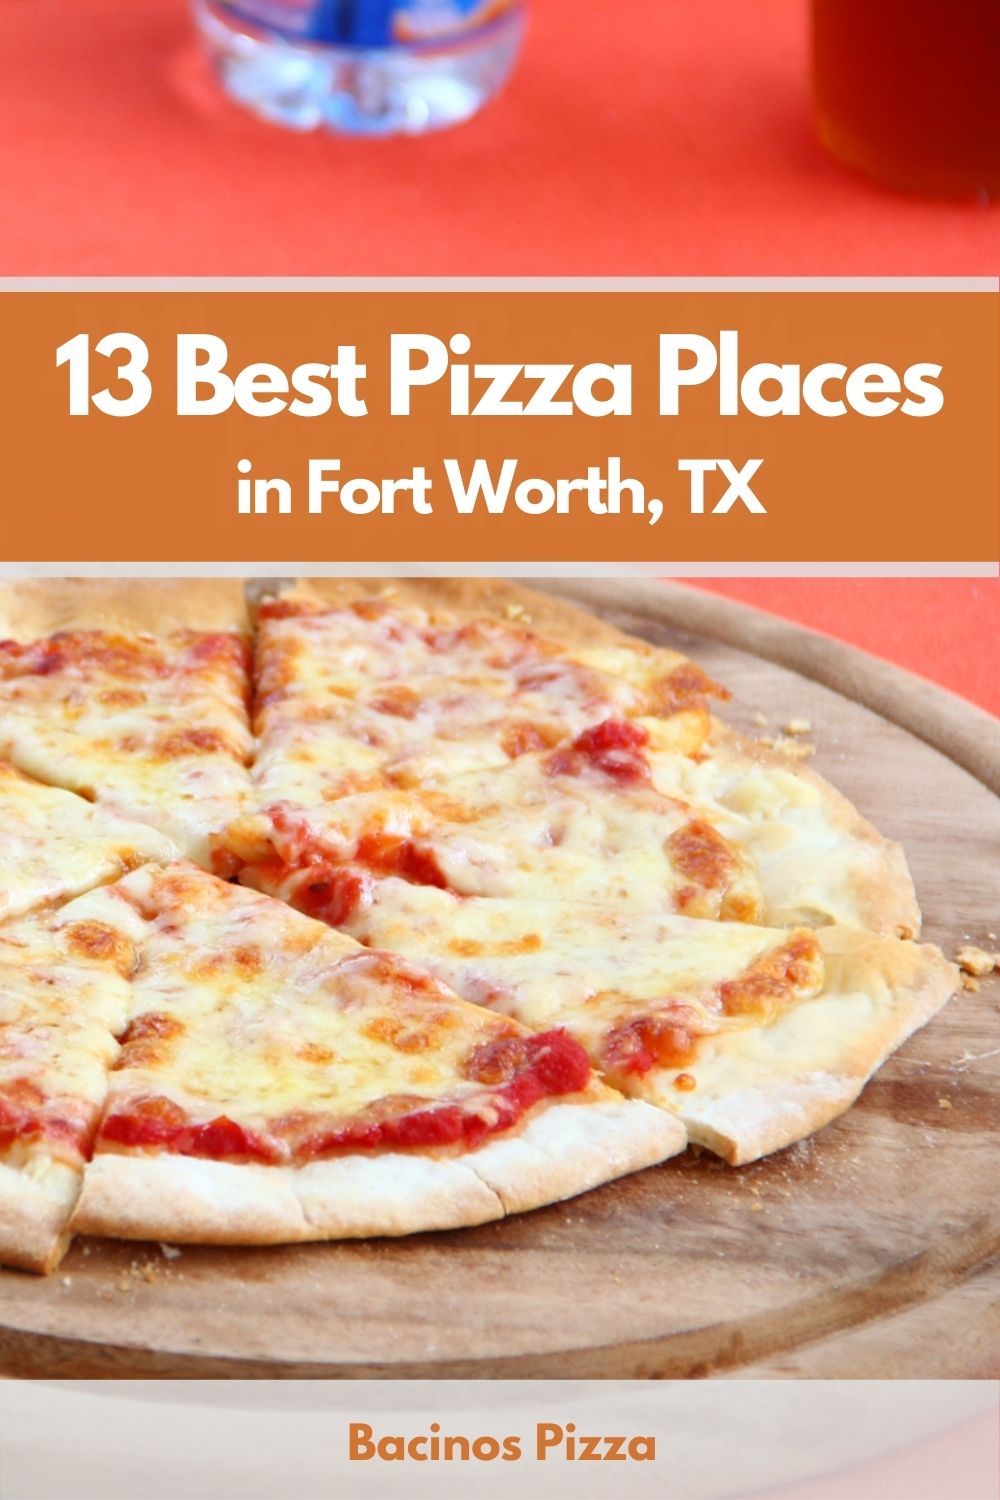 13 Best Pizza Places in Fort Worth, TX pin